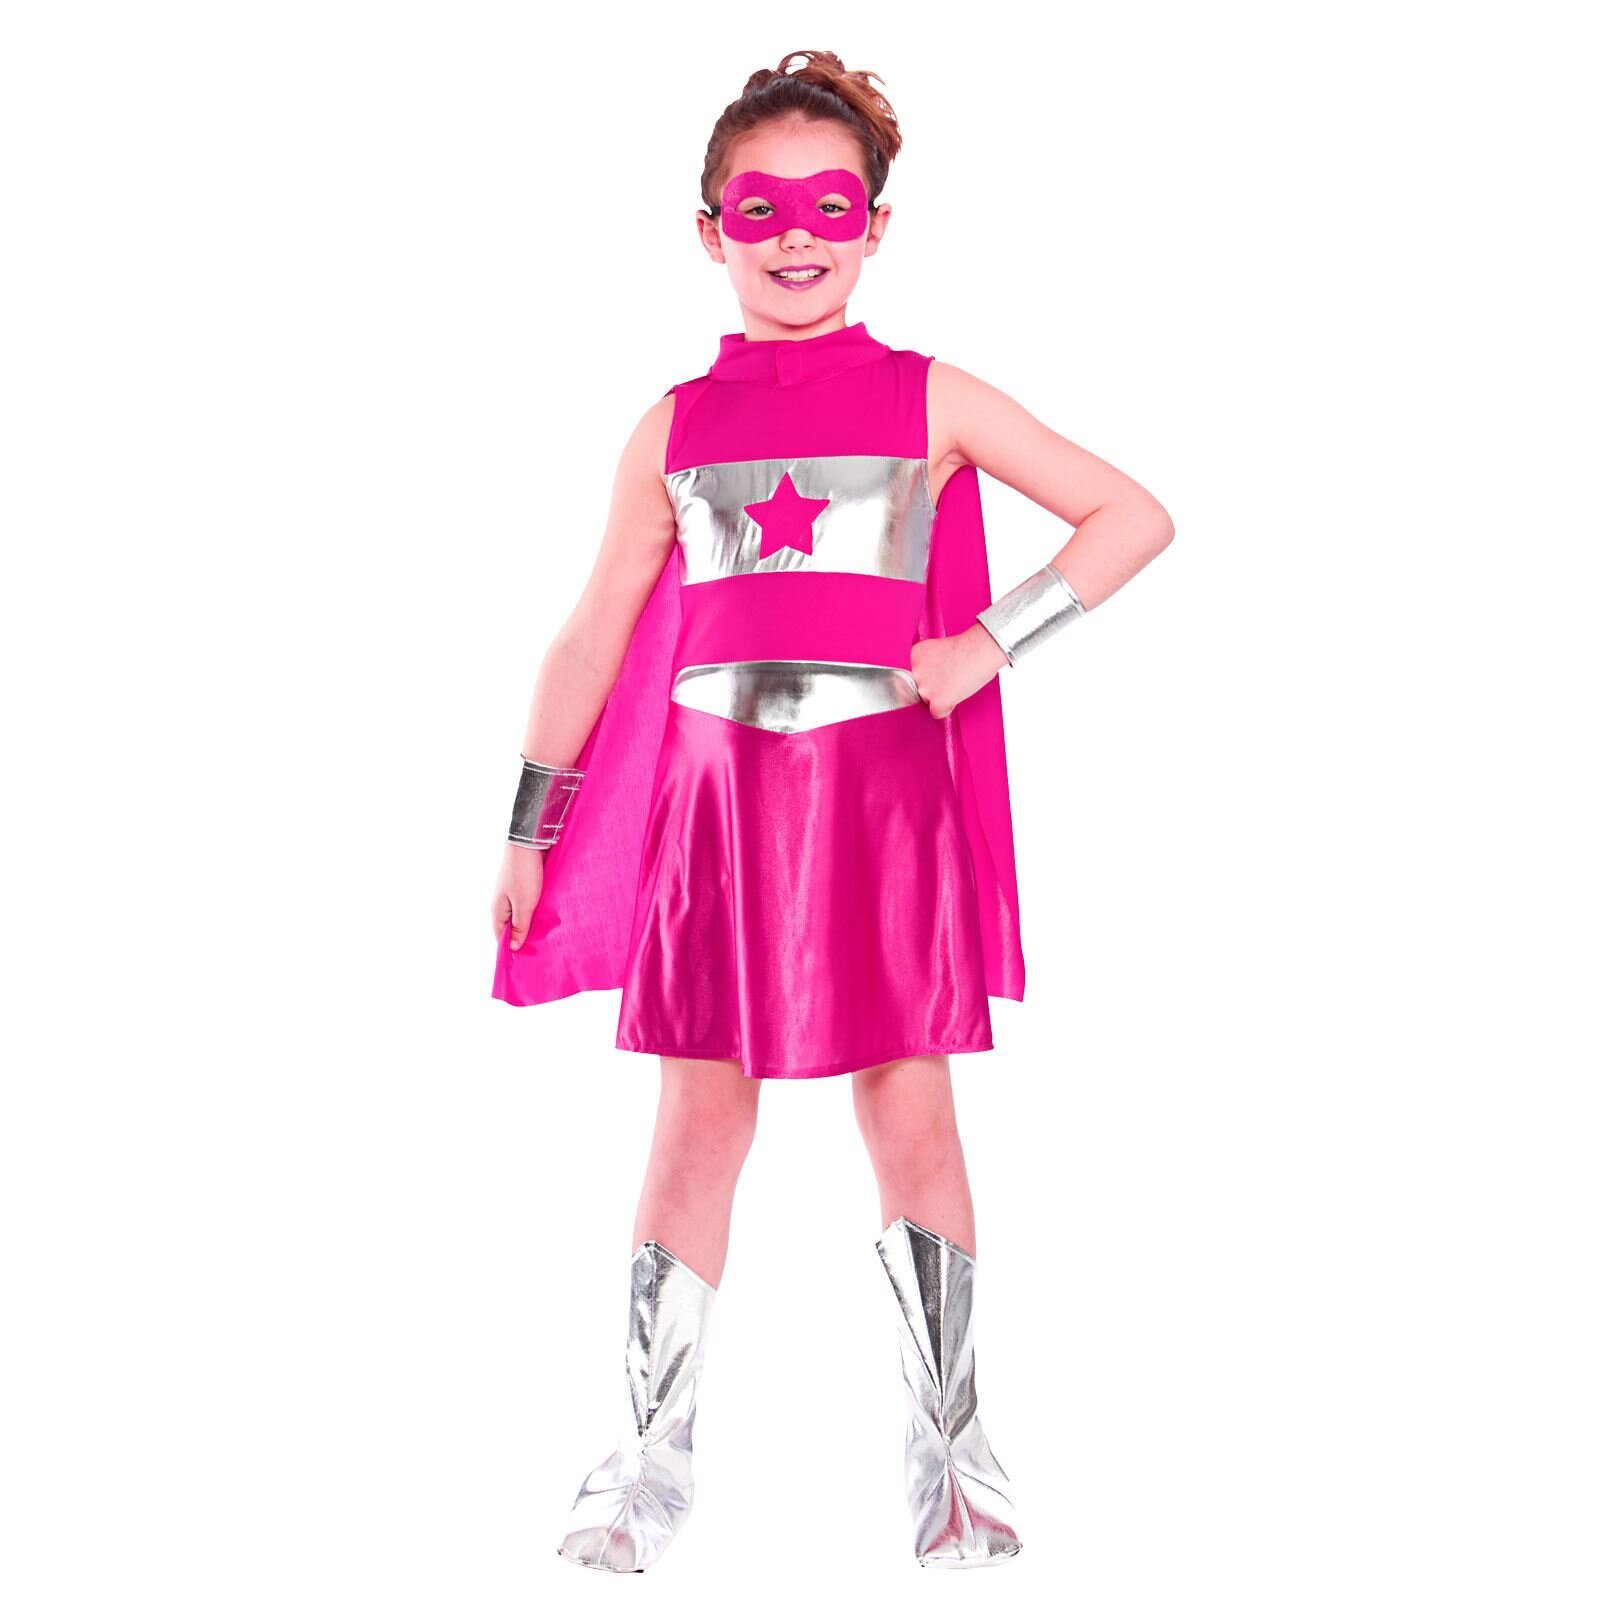 Girls Pink Super Hero Fancy Dress Up Party Costume Halloween Child Cape Age 5-7